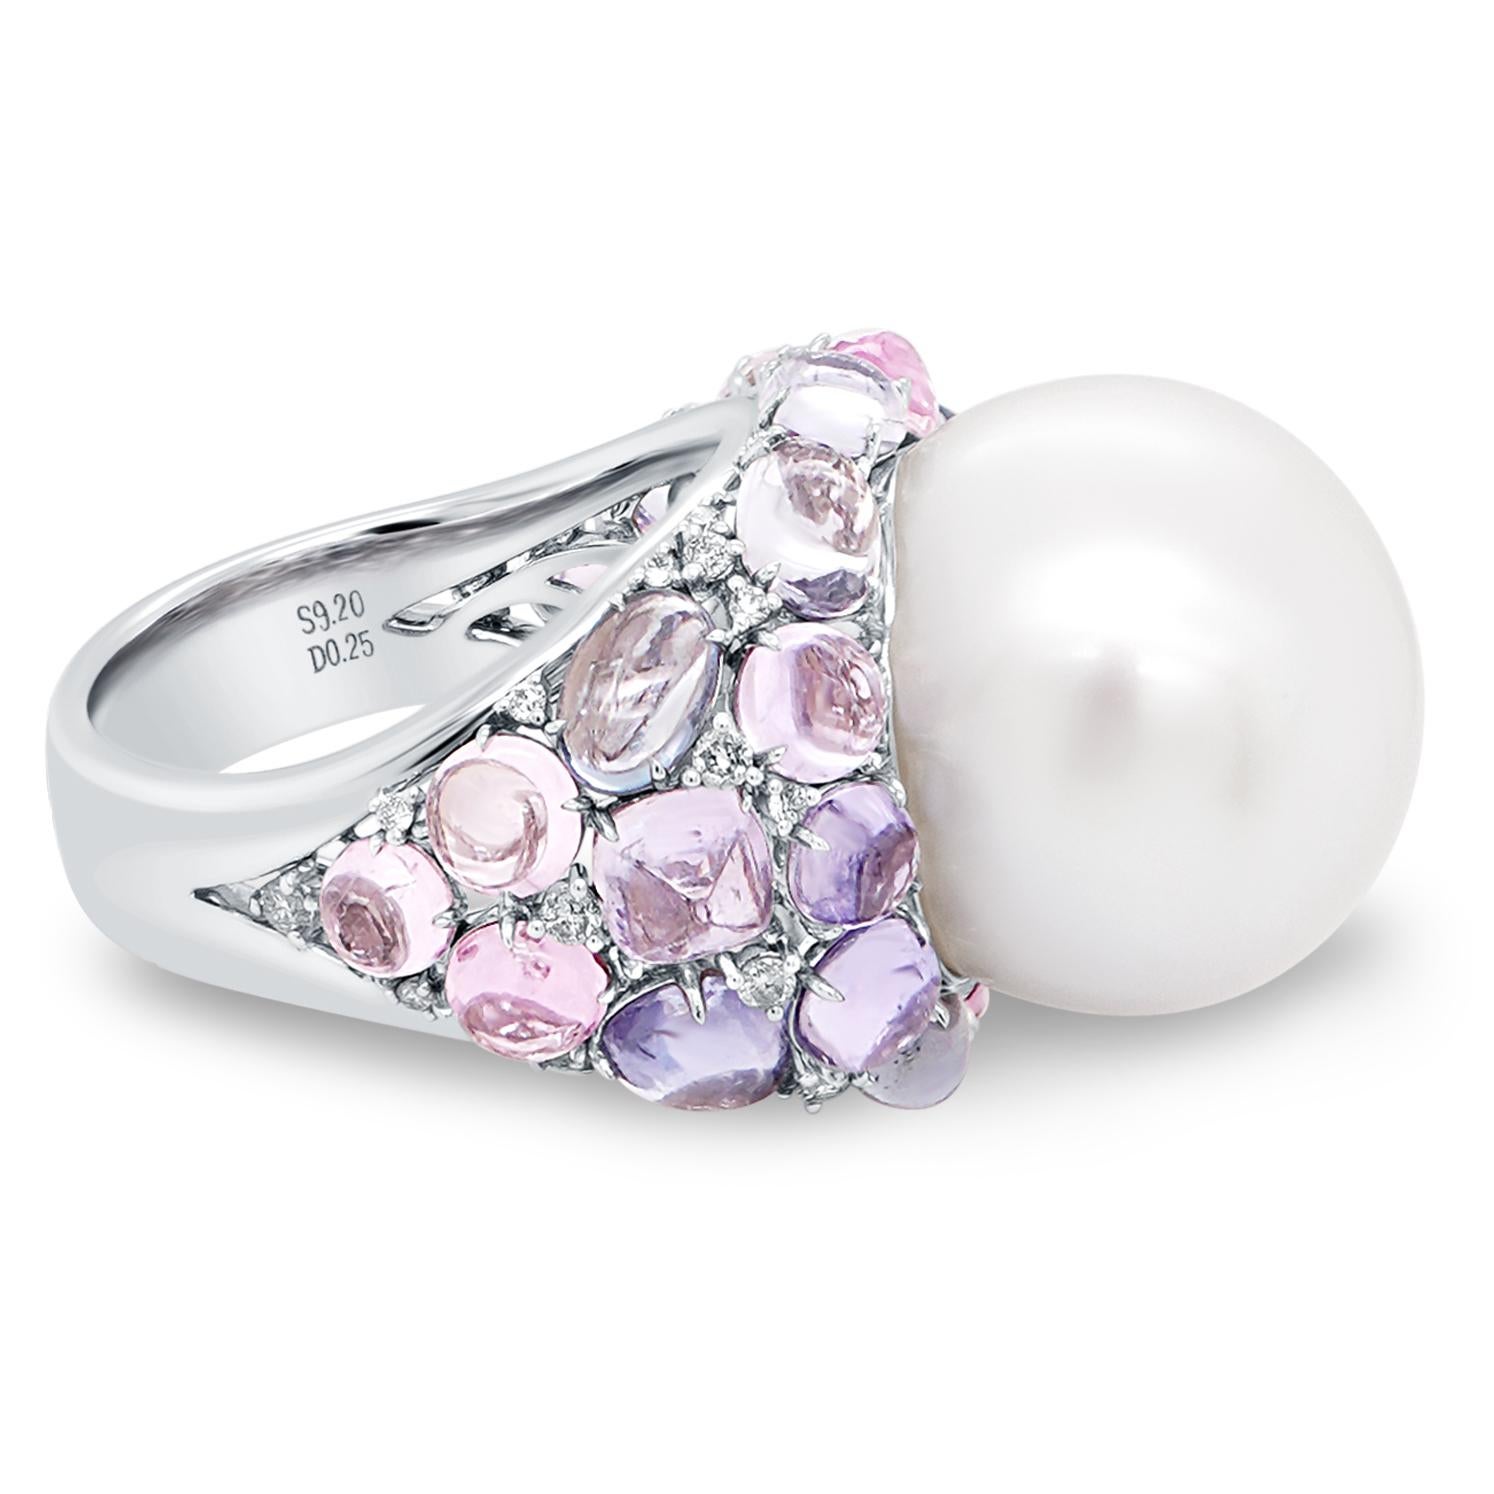 A 28 Carat South Sea Pearl is set along side 8 carat of no heat sapphire cabochons and 0.25 carat of white round brilliant diamond. 
South Sea pearls are generally much larger than other pearl types and have a unique luster quality – a soft